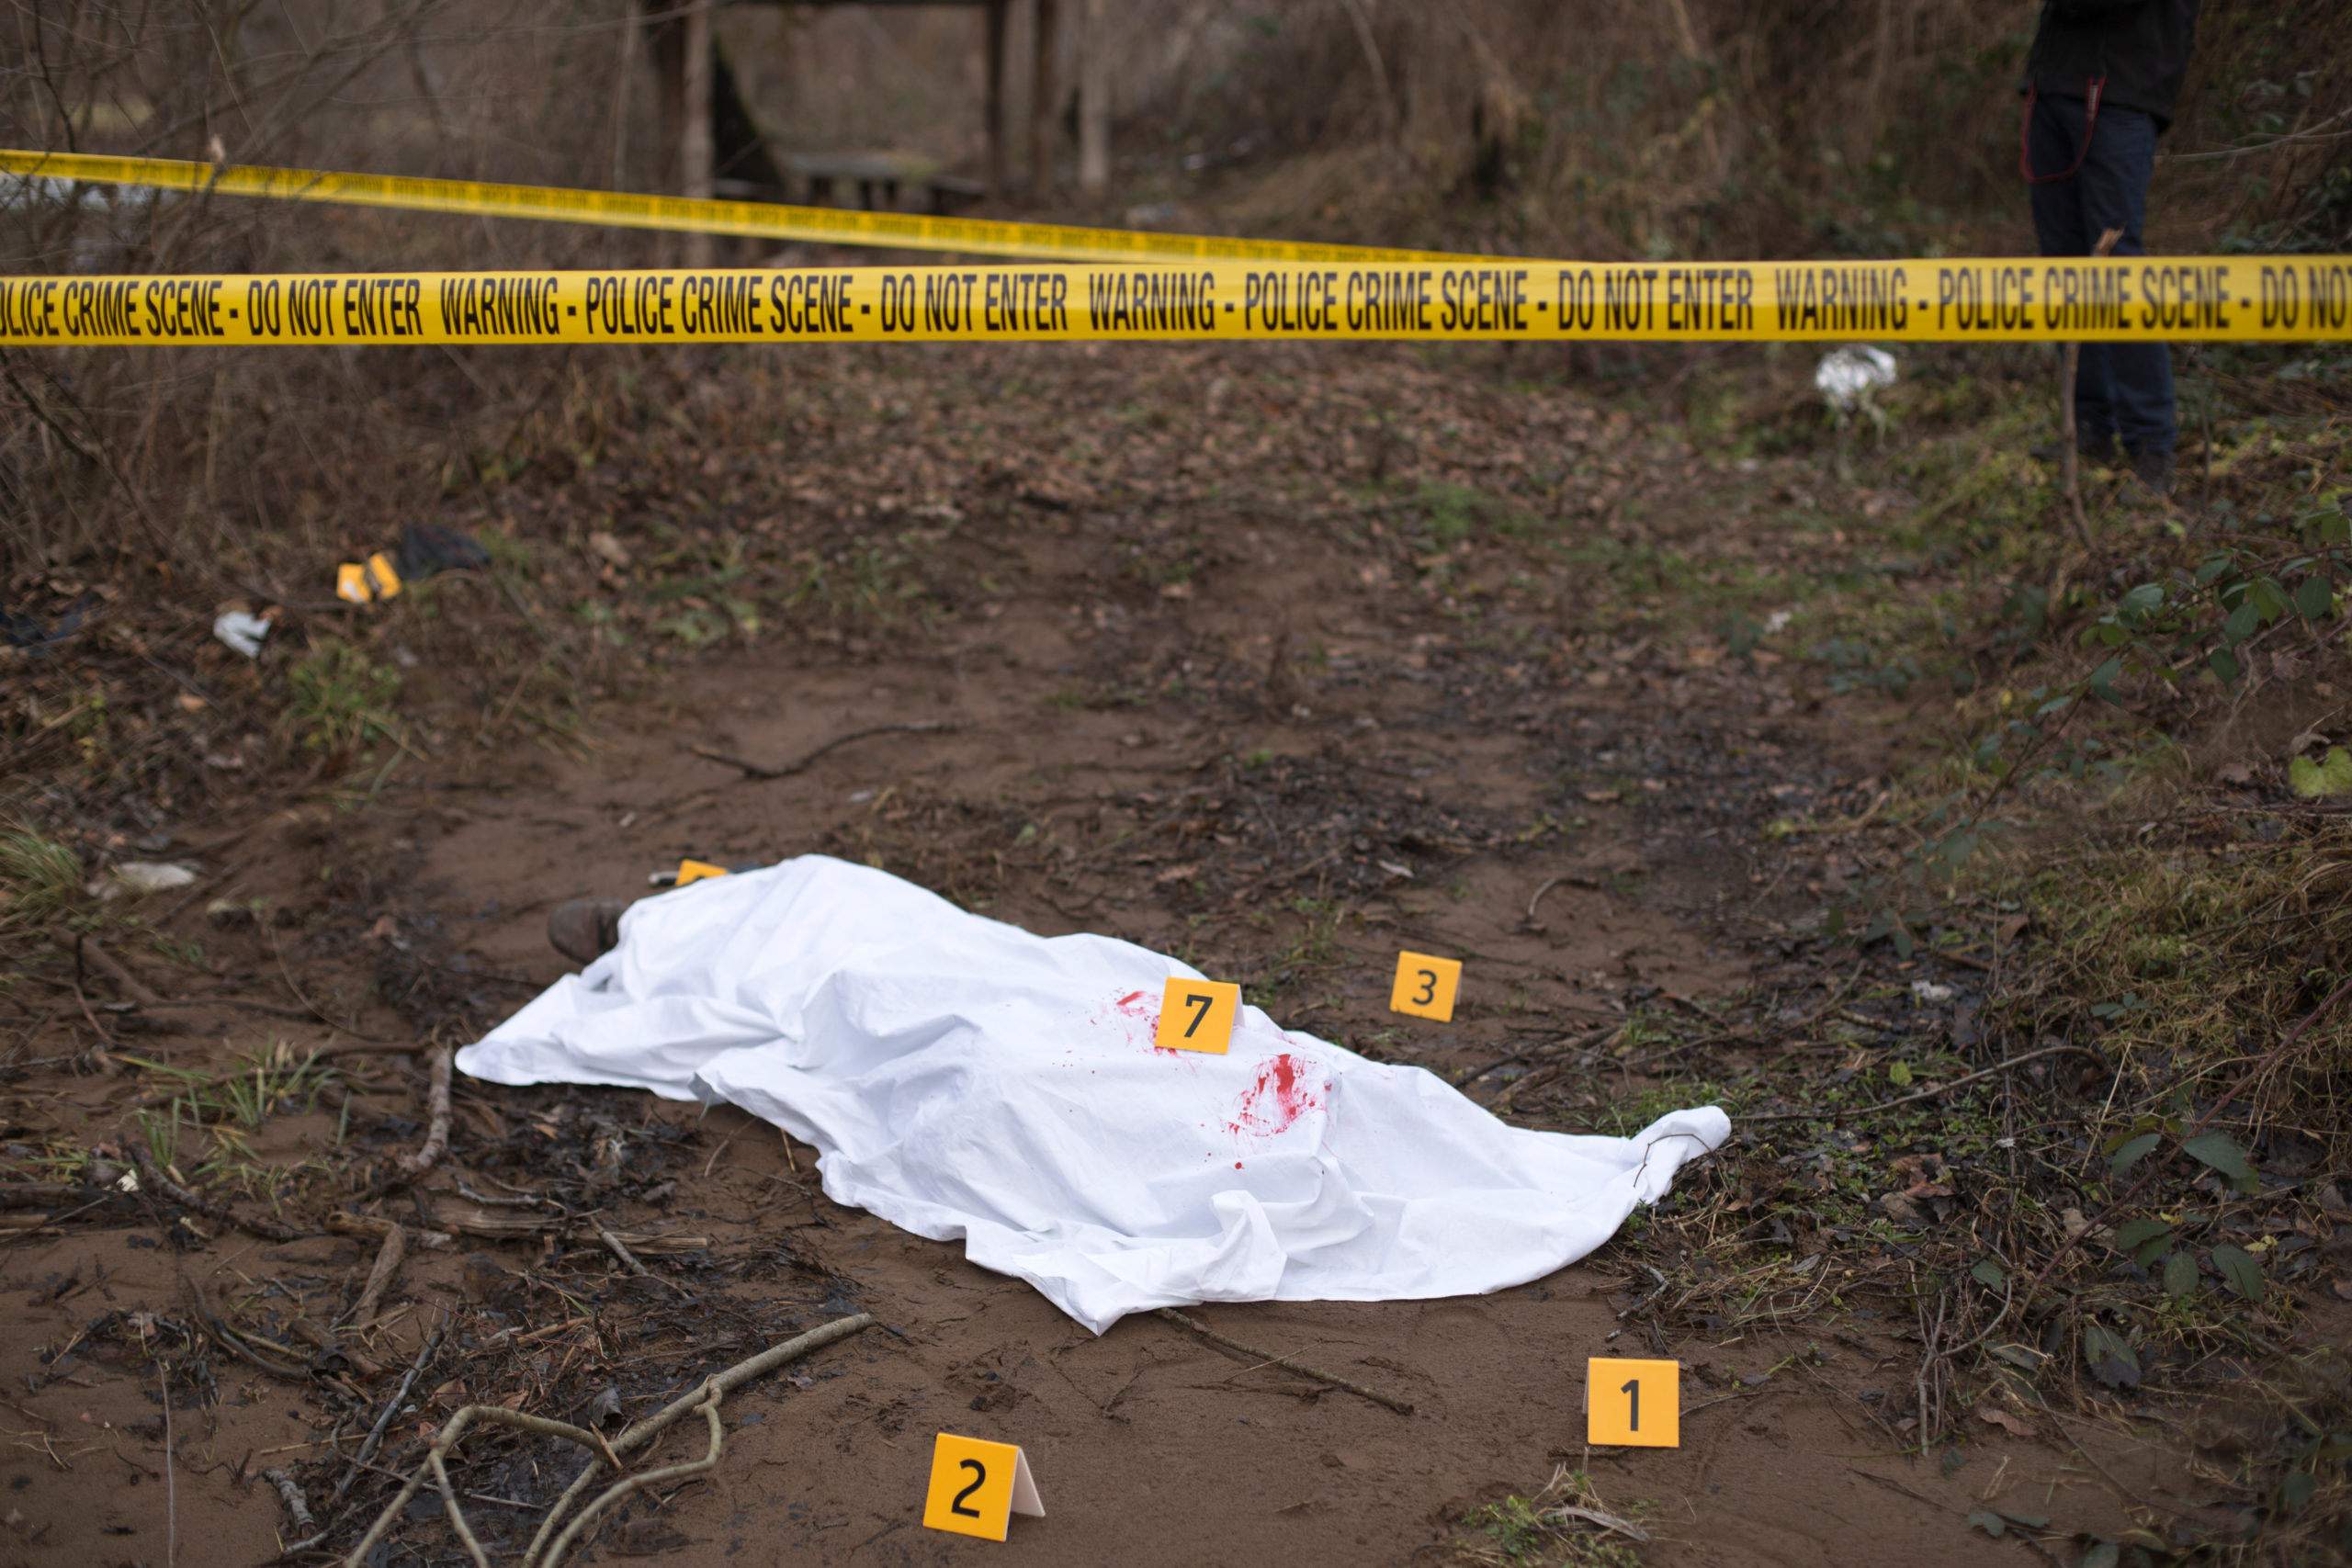 Body found in Langley under mysterious circumstances